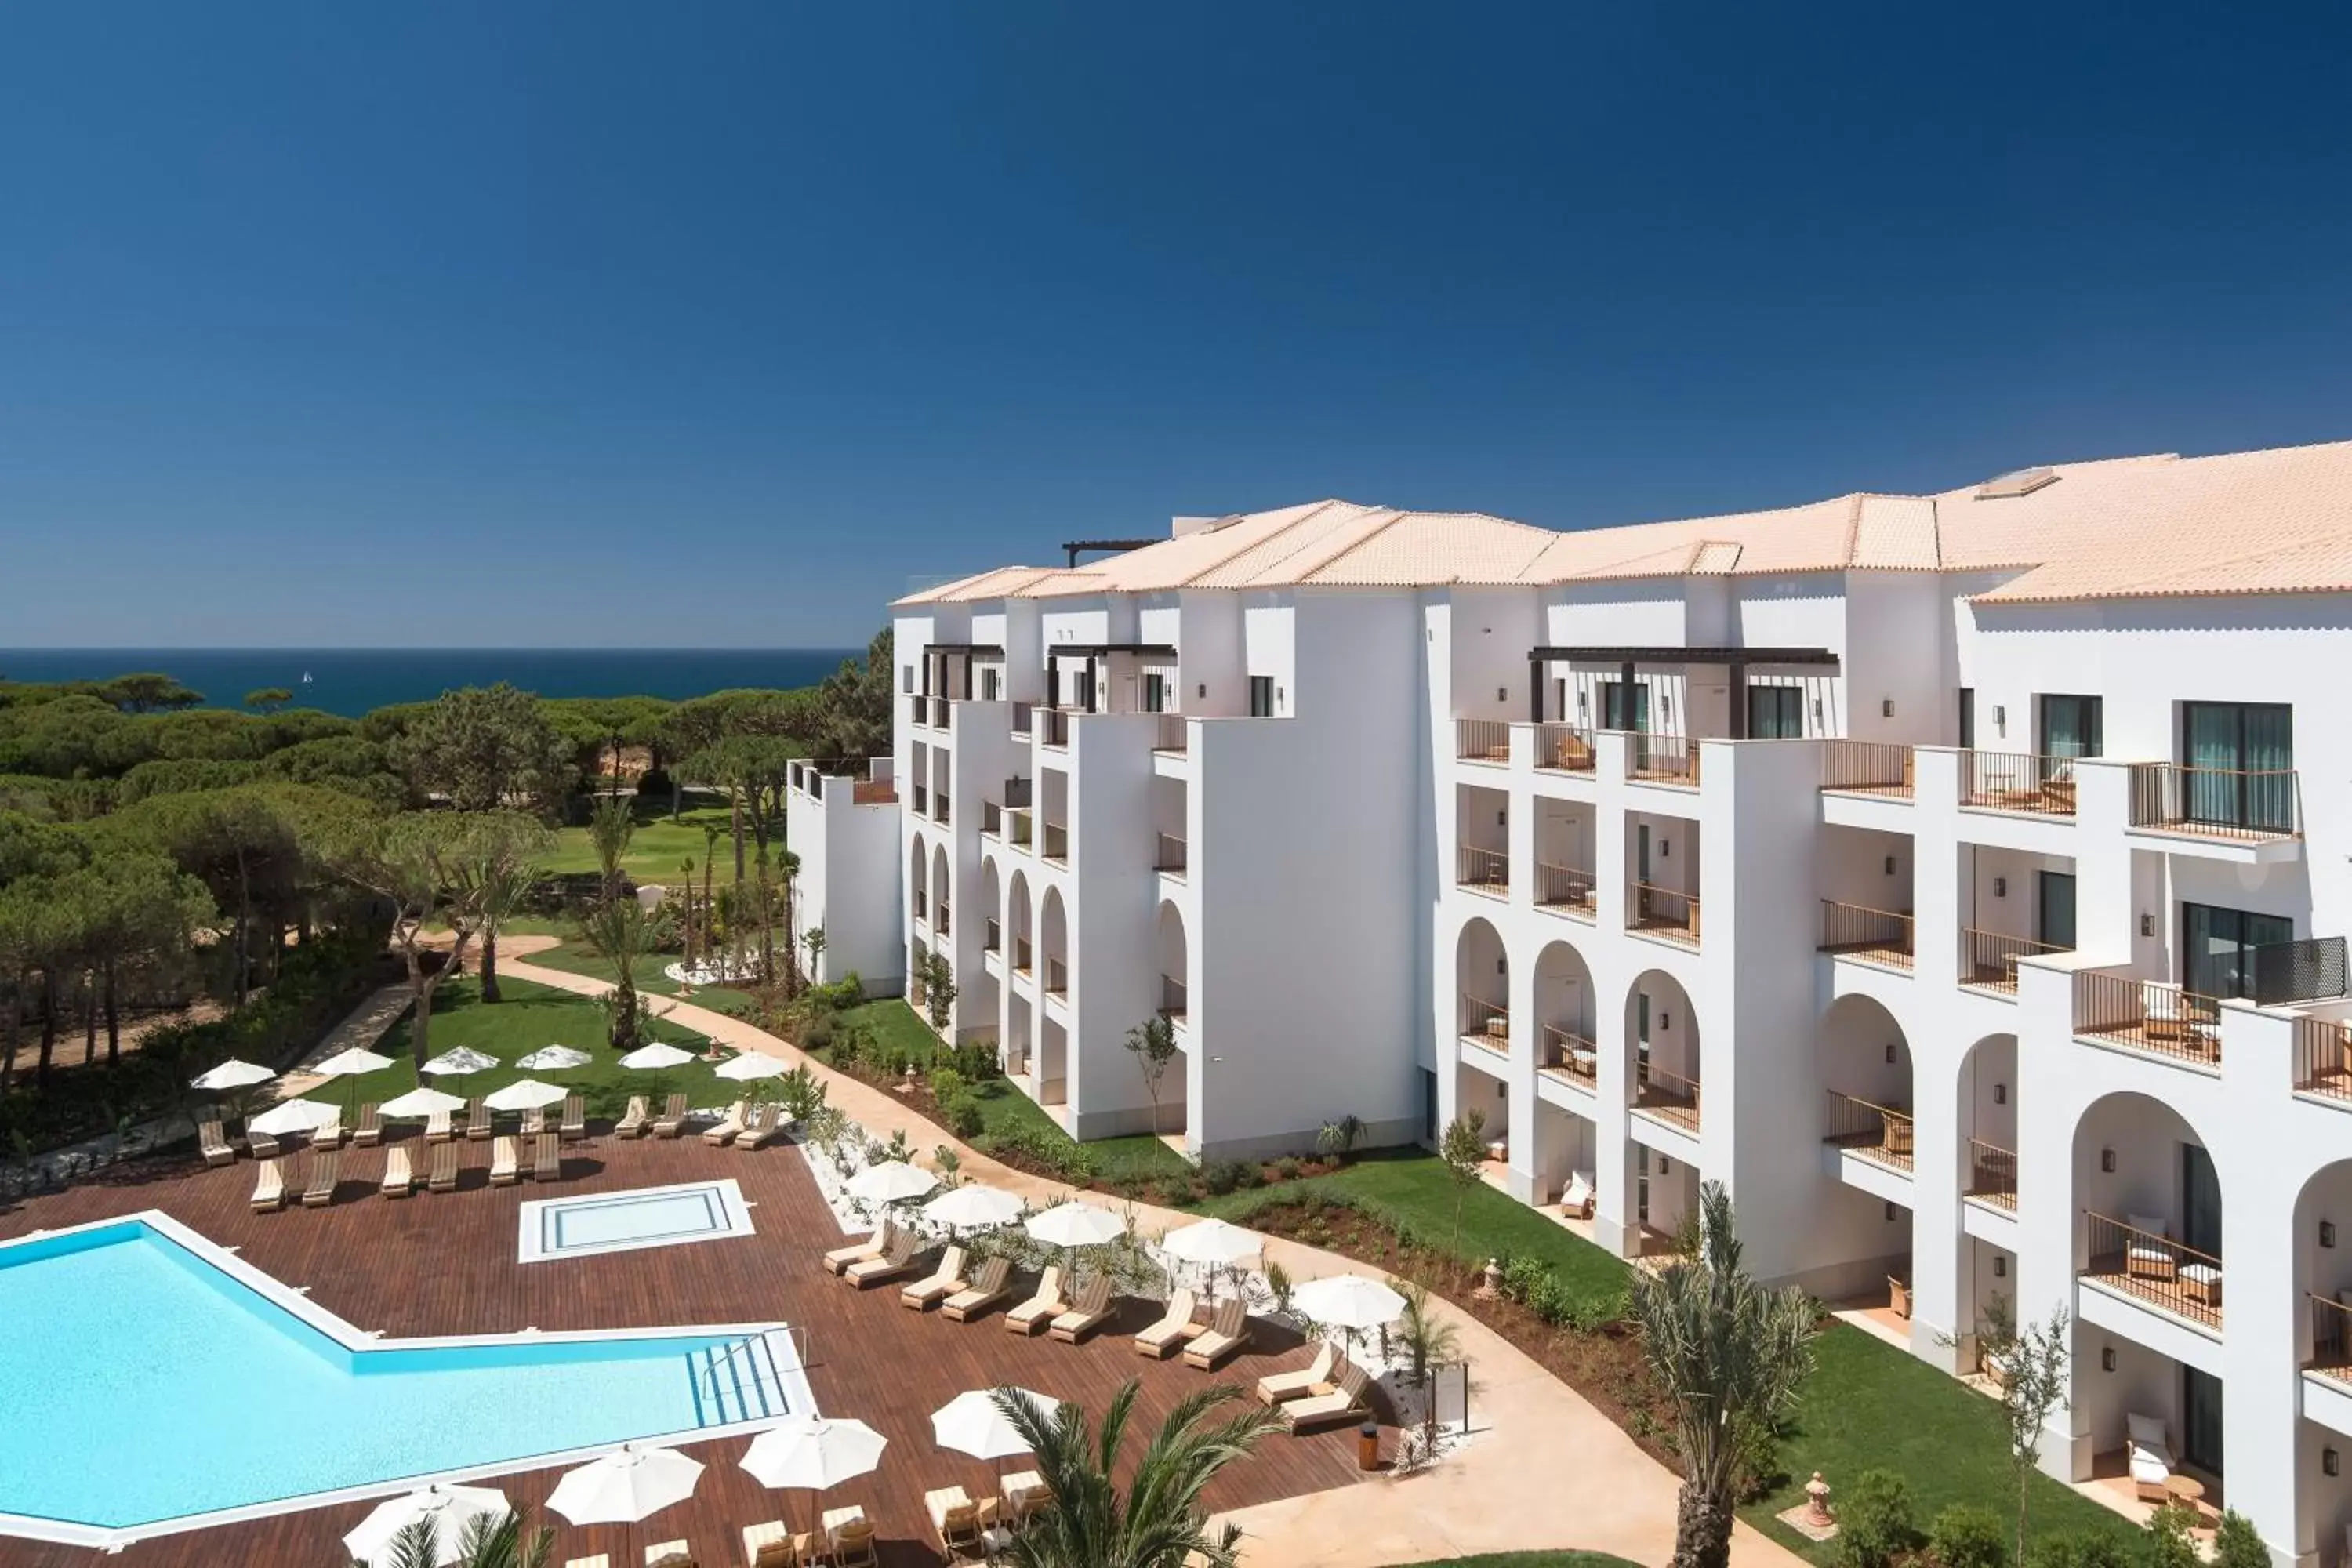 Property building, Pool View in Pine Cliffs Ocean Suites, a Luxury Collection Resort & Spa, Algarve